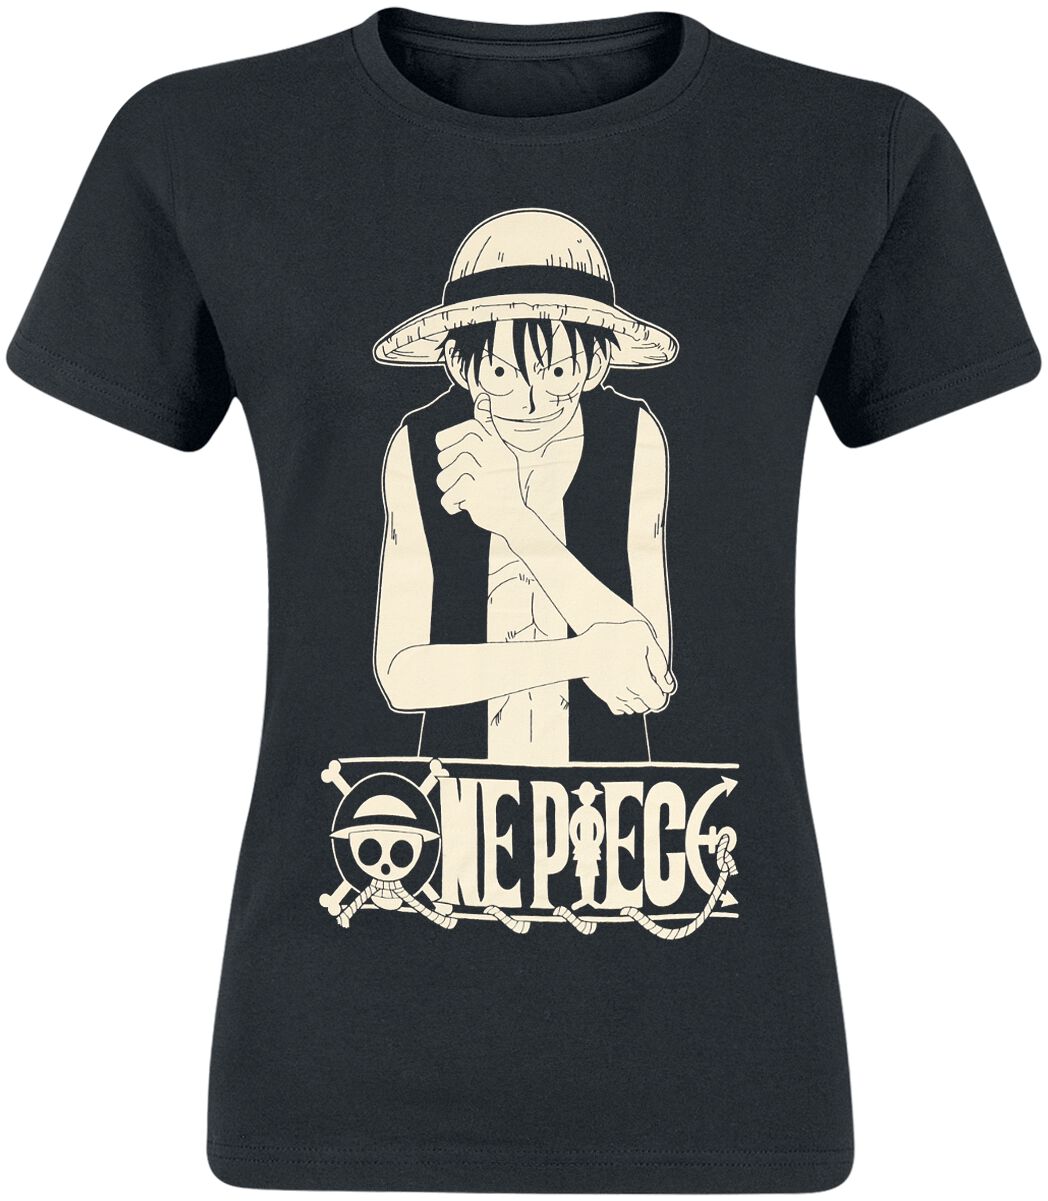 Monkey D Luffy One Piece Long Sleeve T-Shirts for Sale